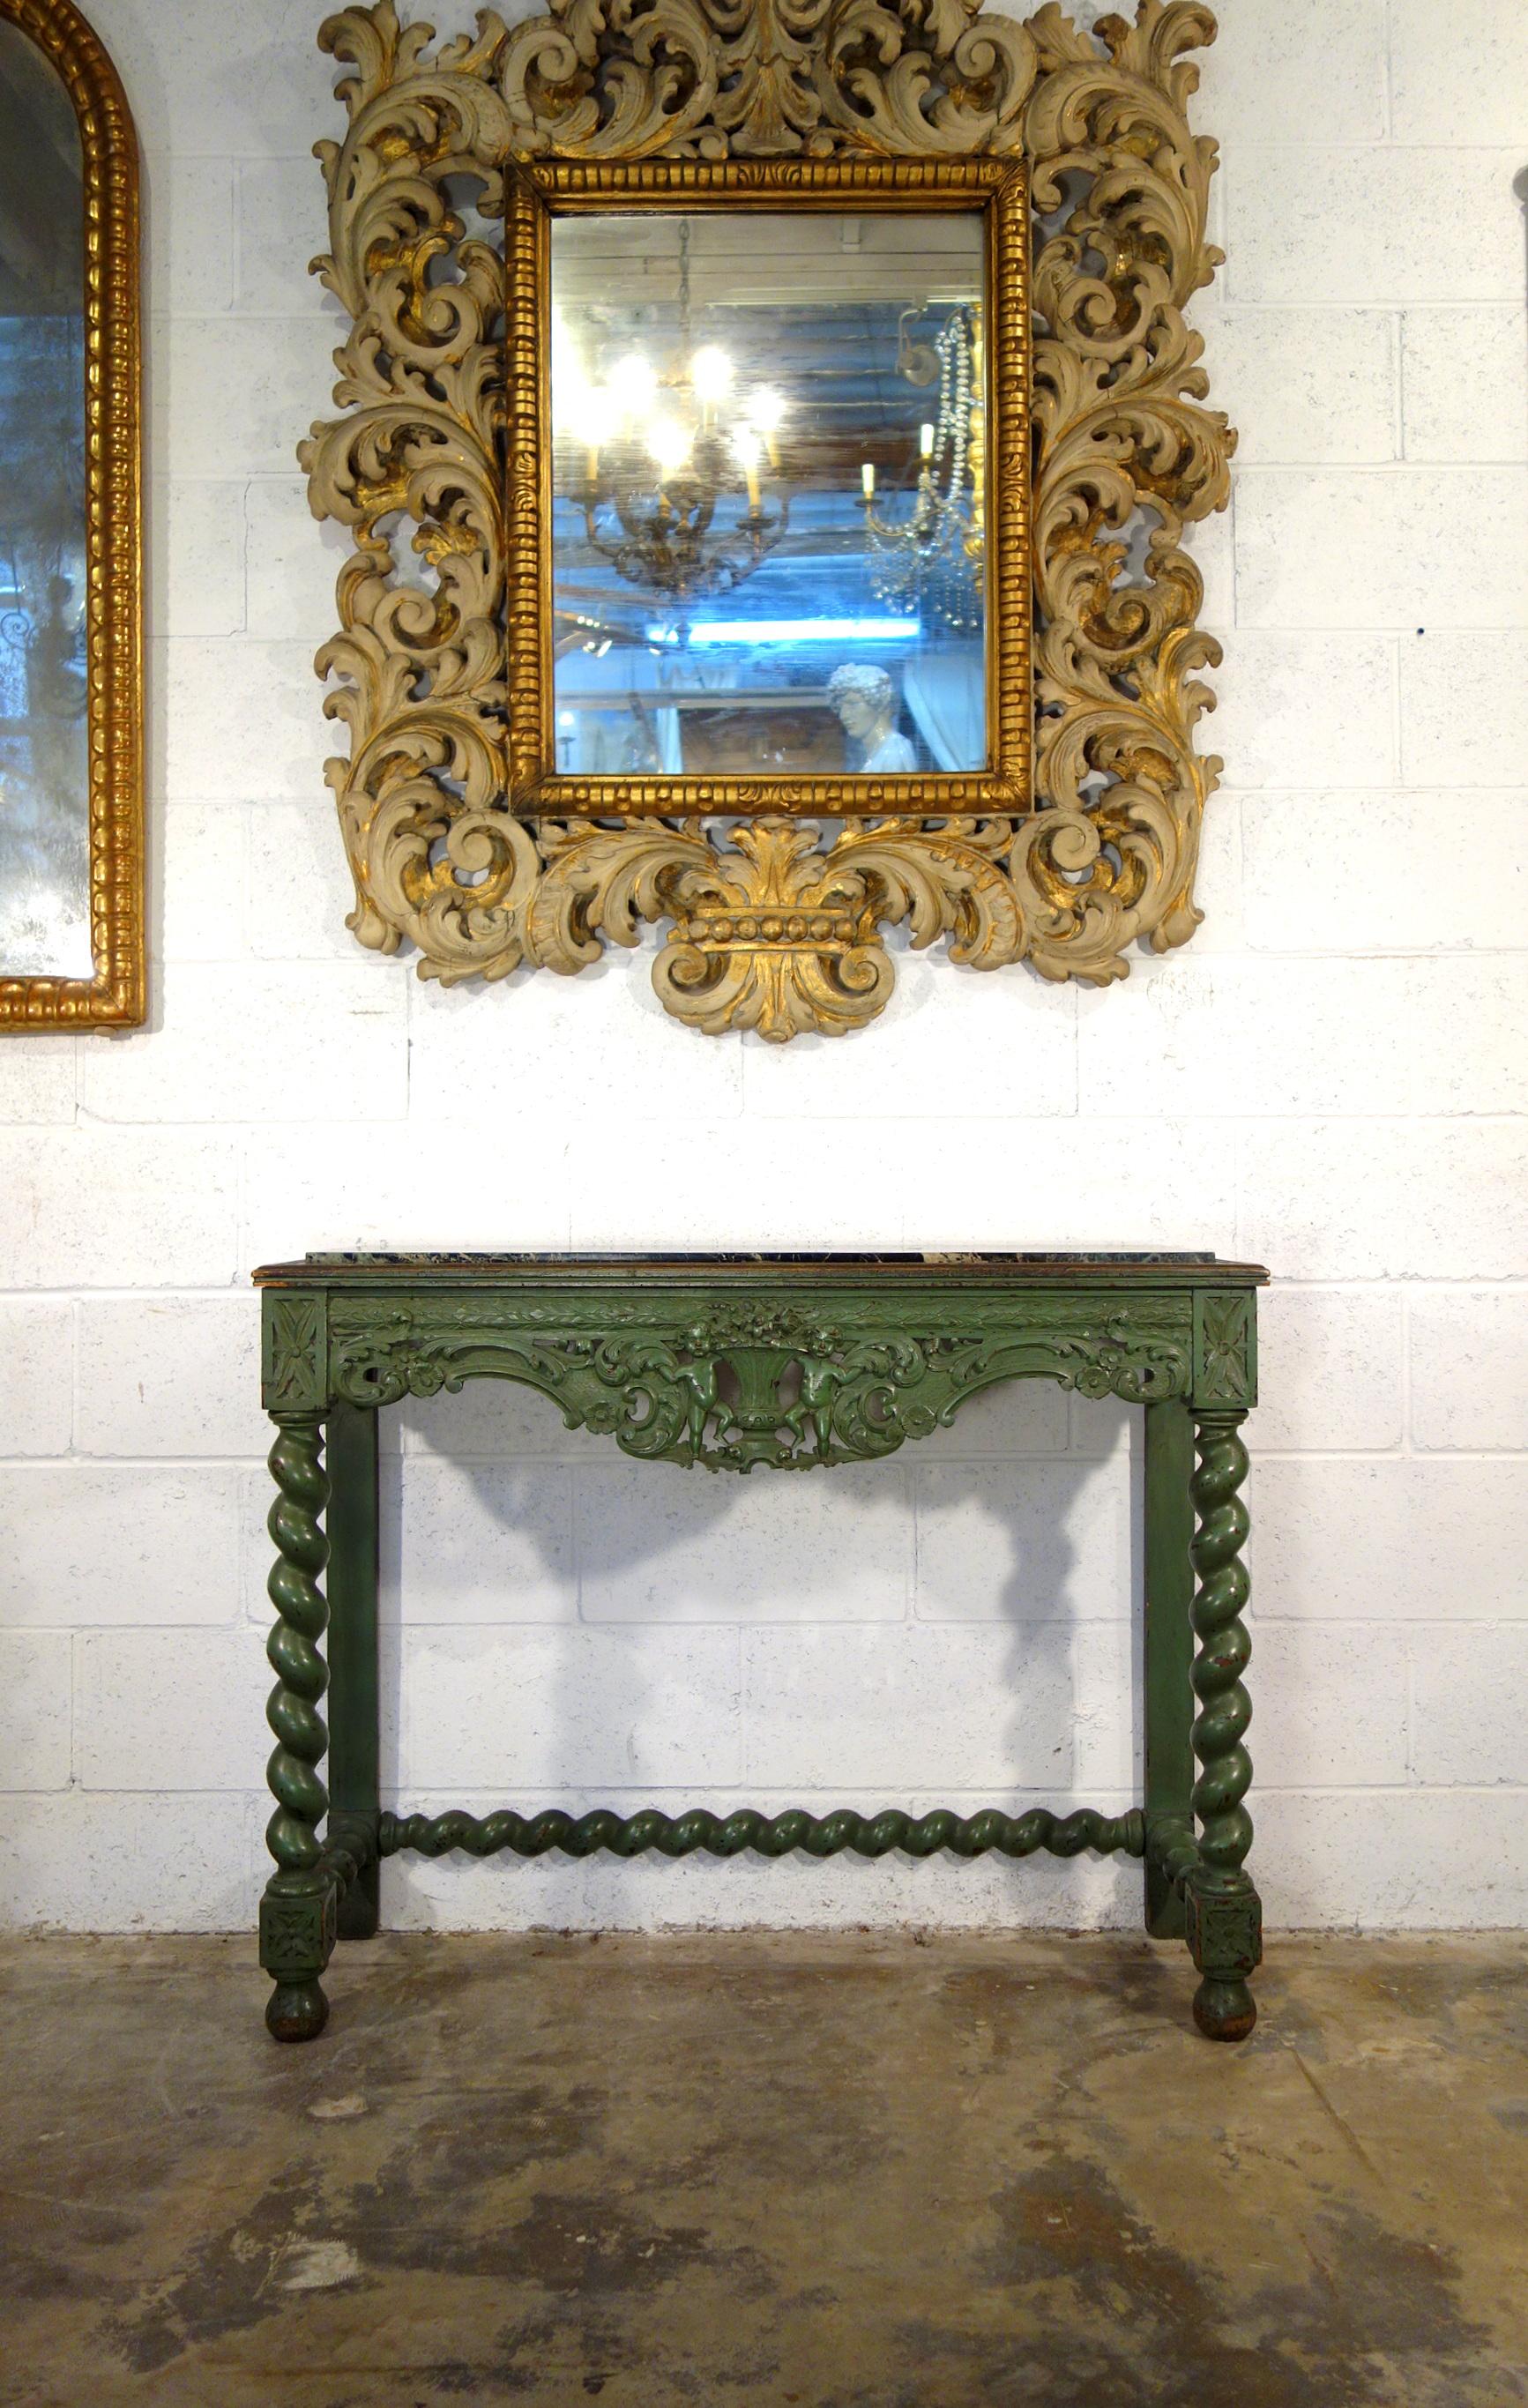 Lovely early 19th century carved console with turned legs and cross stretcher. Two cherubs sustaining a triumph of flowers in the center. Framed inset top is a beautiful piece of deep green marble, possibly Italian Verdi Alpi. 

Measures: 41.75